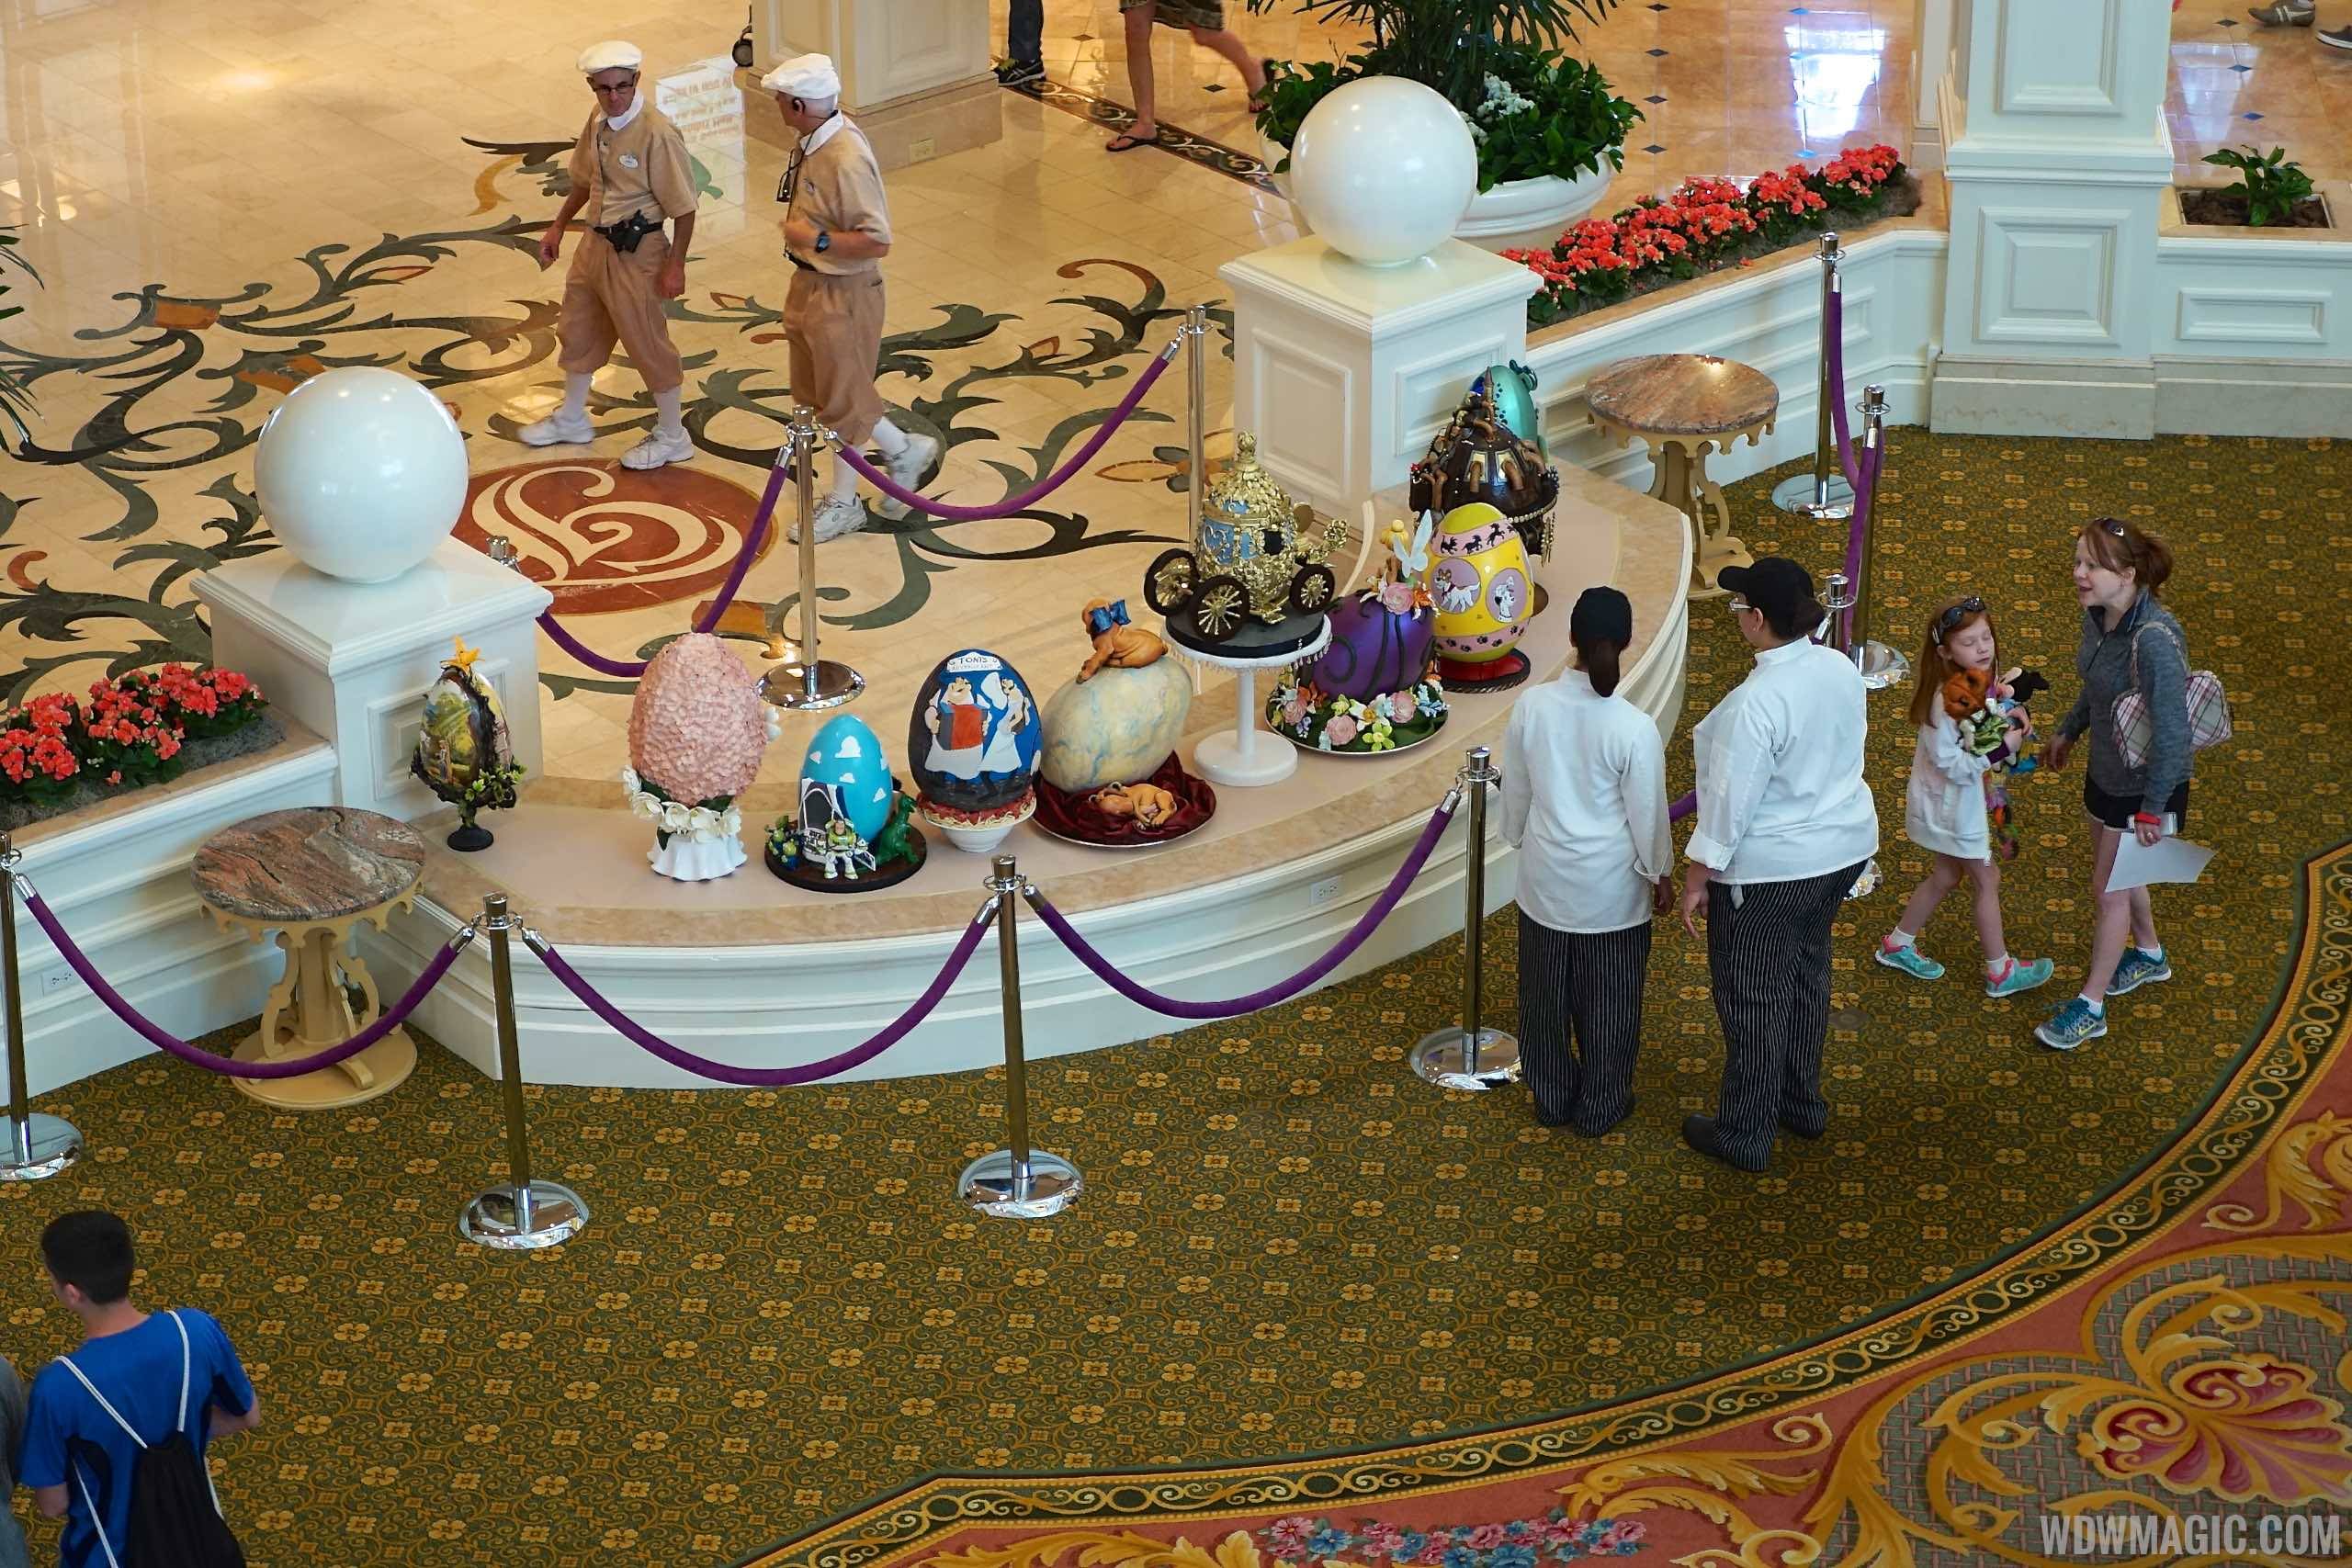 PHOTOS - Easter Egg creations now on display at Disney's Grand Floridian Resort